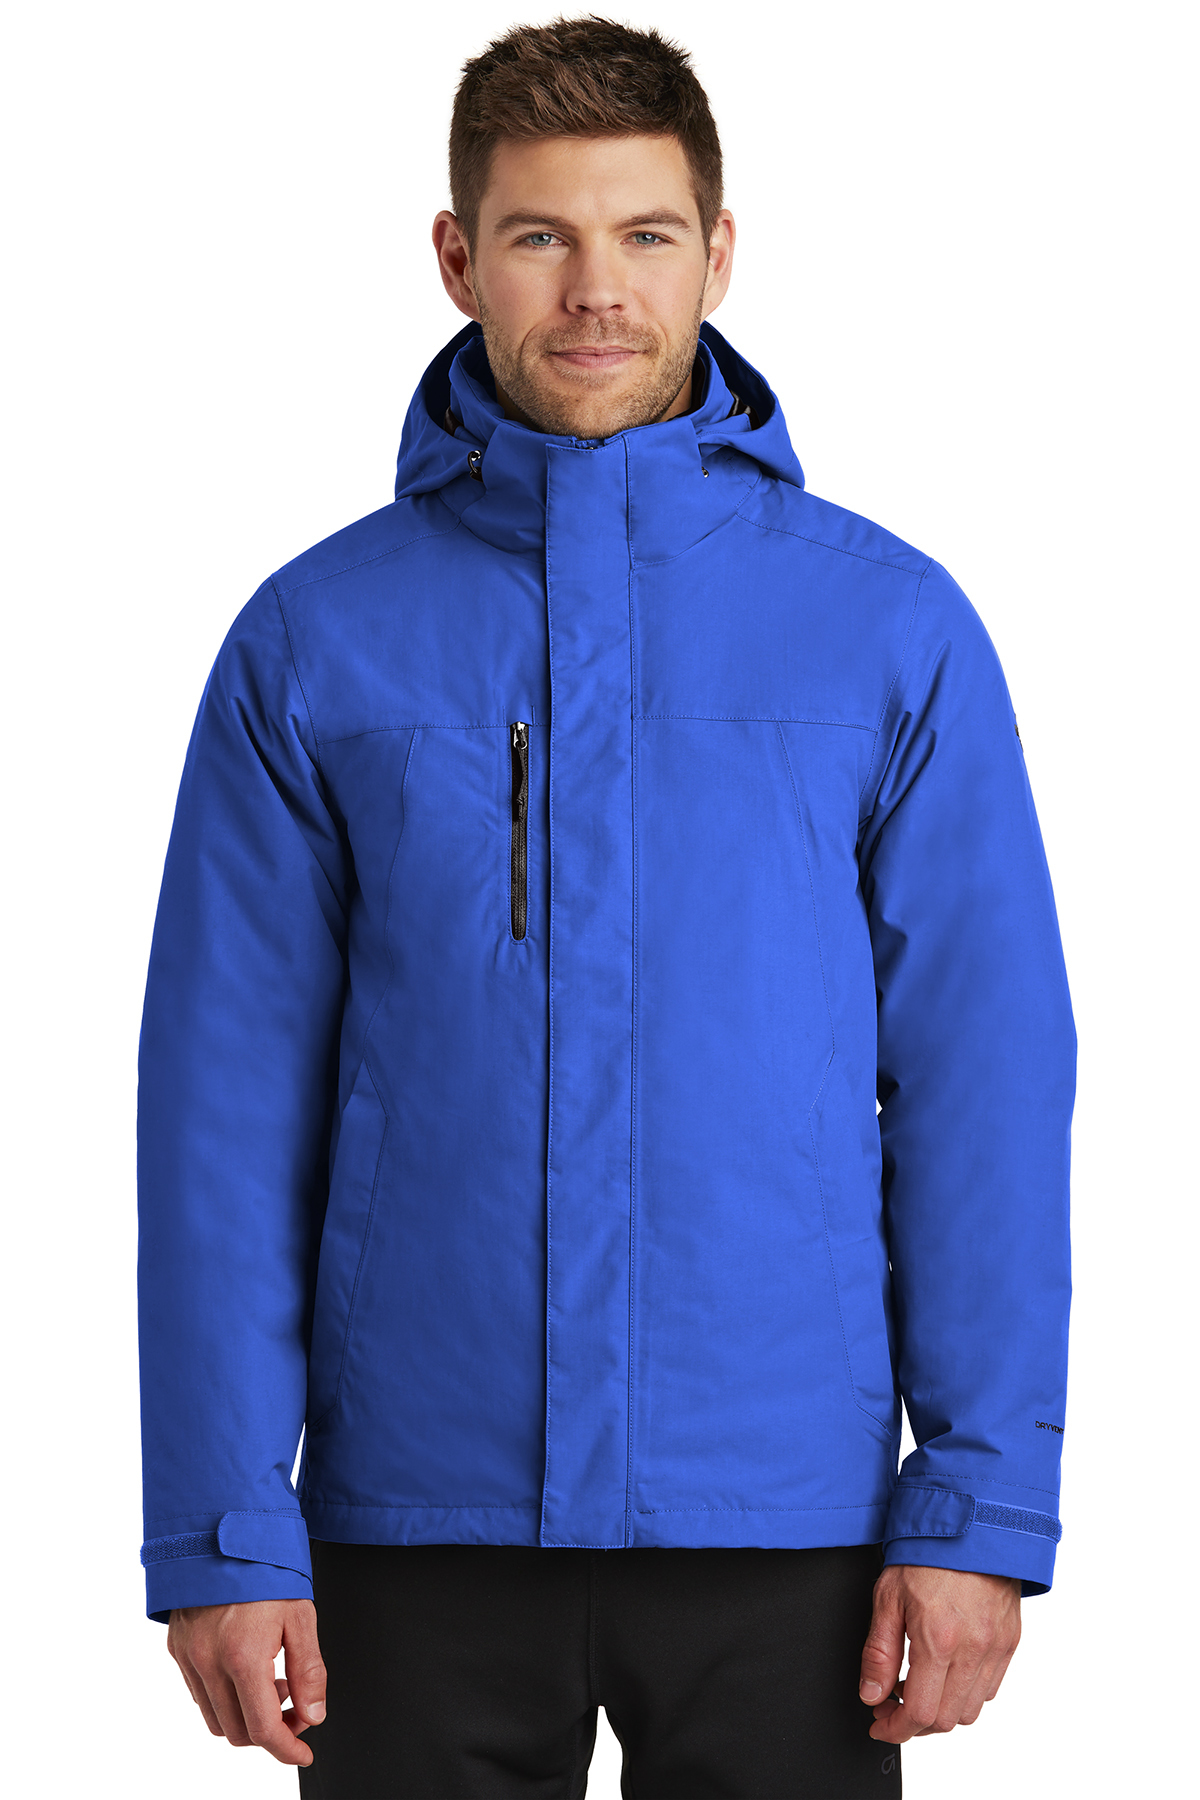 north face 3 in 1